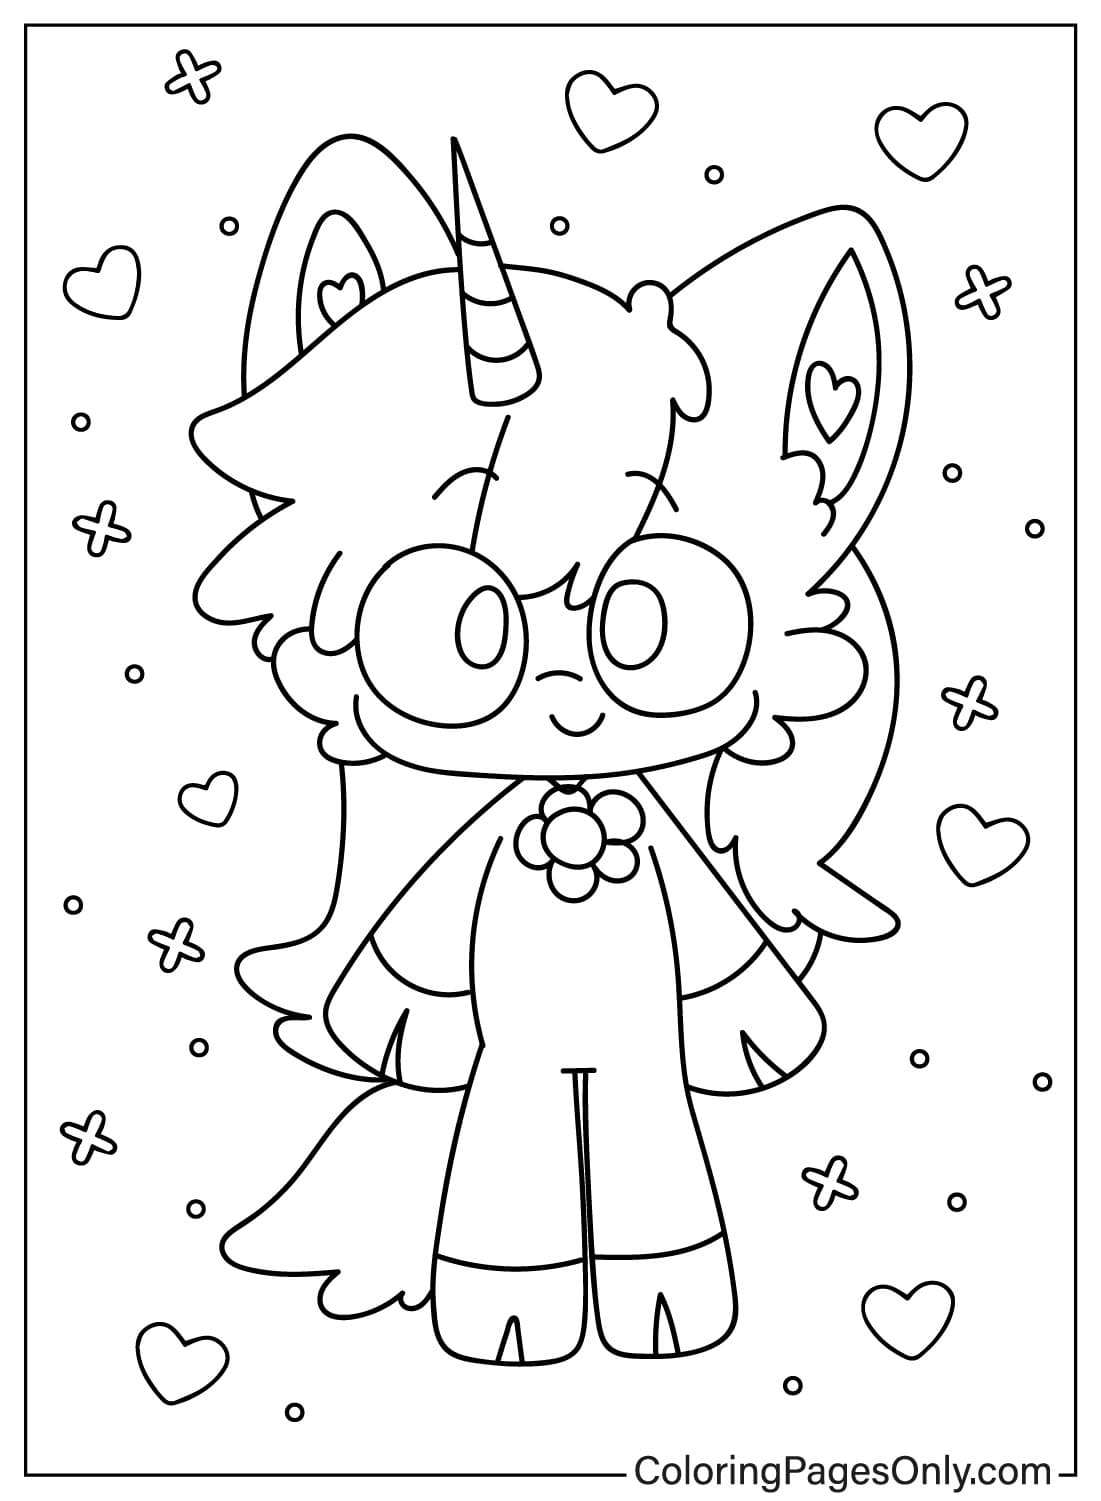 Cute CraftyCorn Coloring Page from CraftyCorn